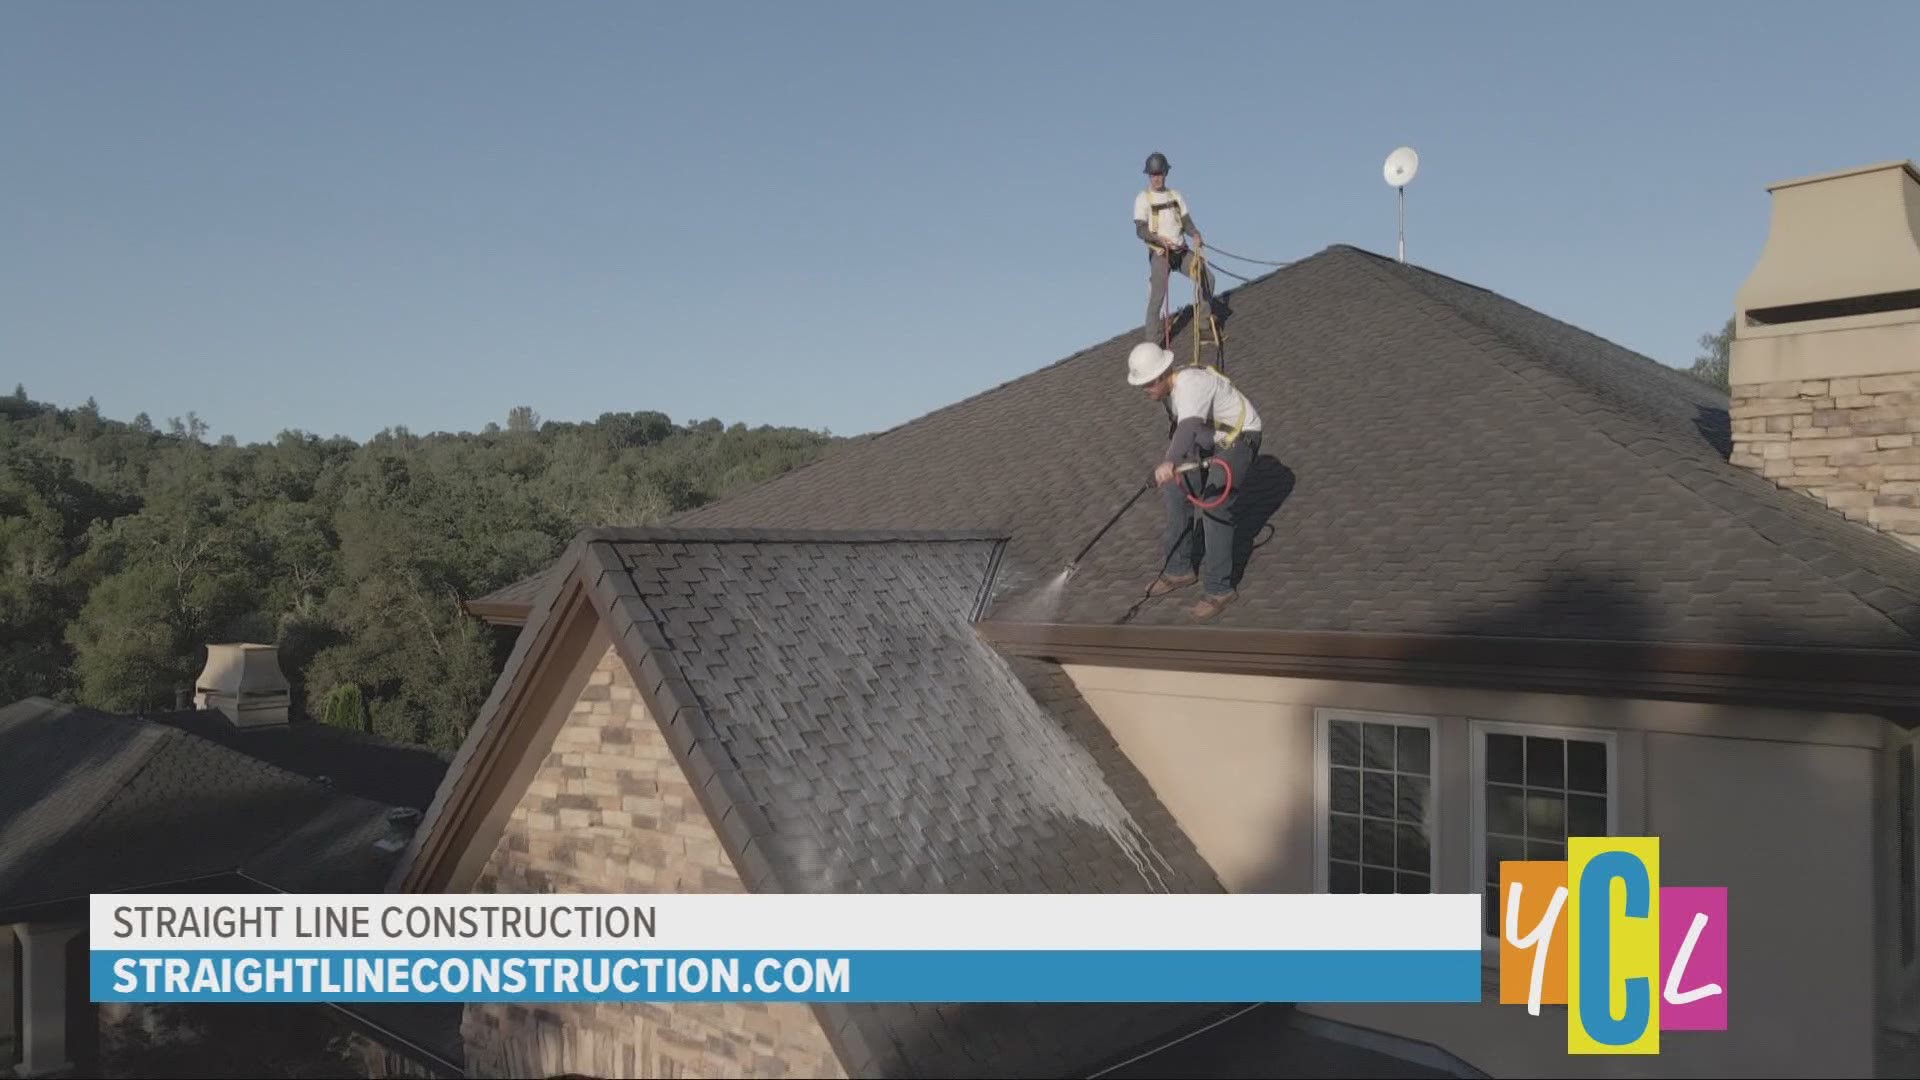 Now may be the time for homeowners to ensure their roofs can withstand the elements all year-round. This segment was paid for by Straight Line Construction.